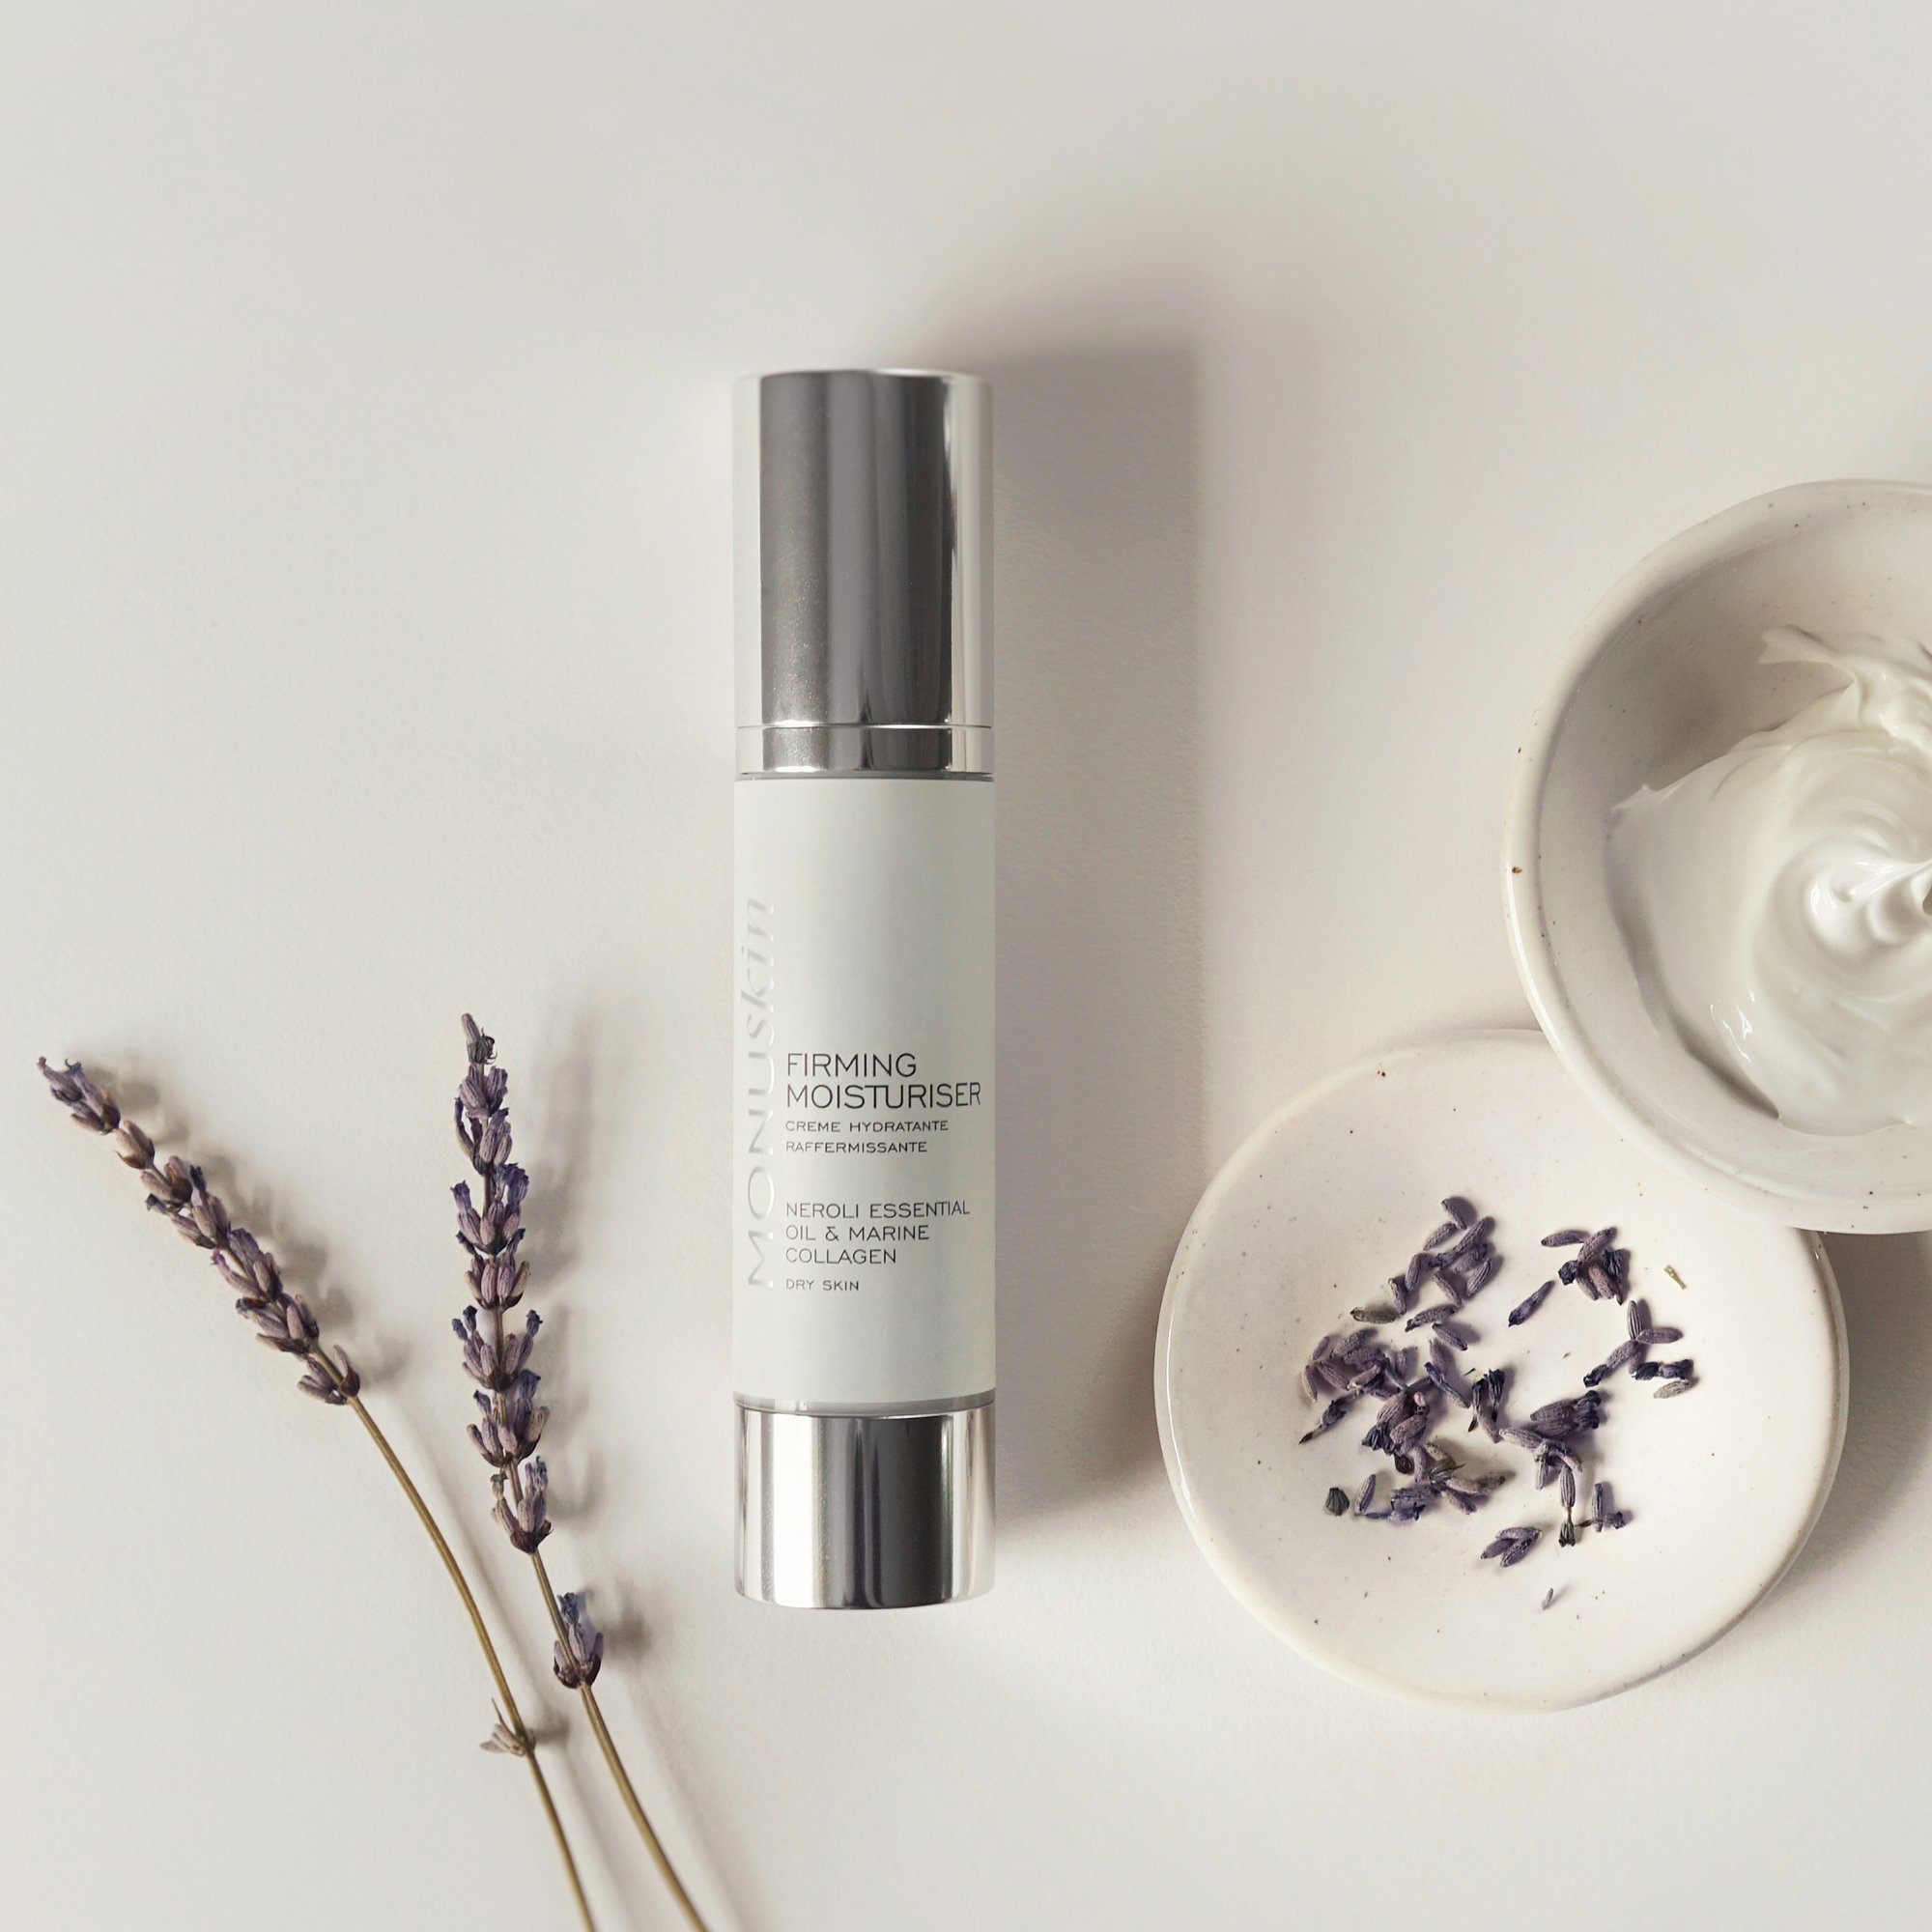 Our Firming Moisturiser enriched with Marine Collagen which leaves fine lines tightened and toned - perfect for dry or sensitive skin types

#firmingmoisturizer #firmingskincare #dailyskincare #dailyskinroutine #dailyskincaretips #dailyskincareroutin